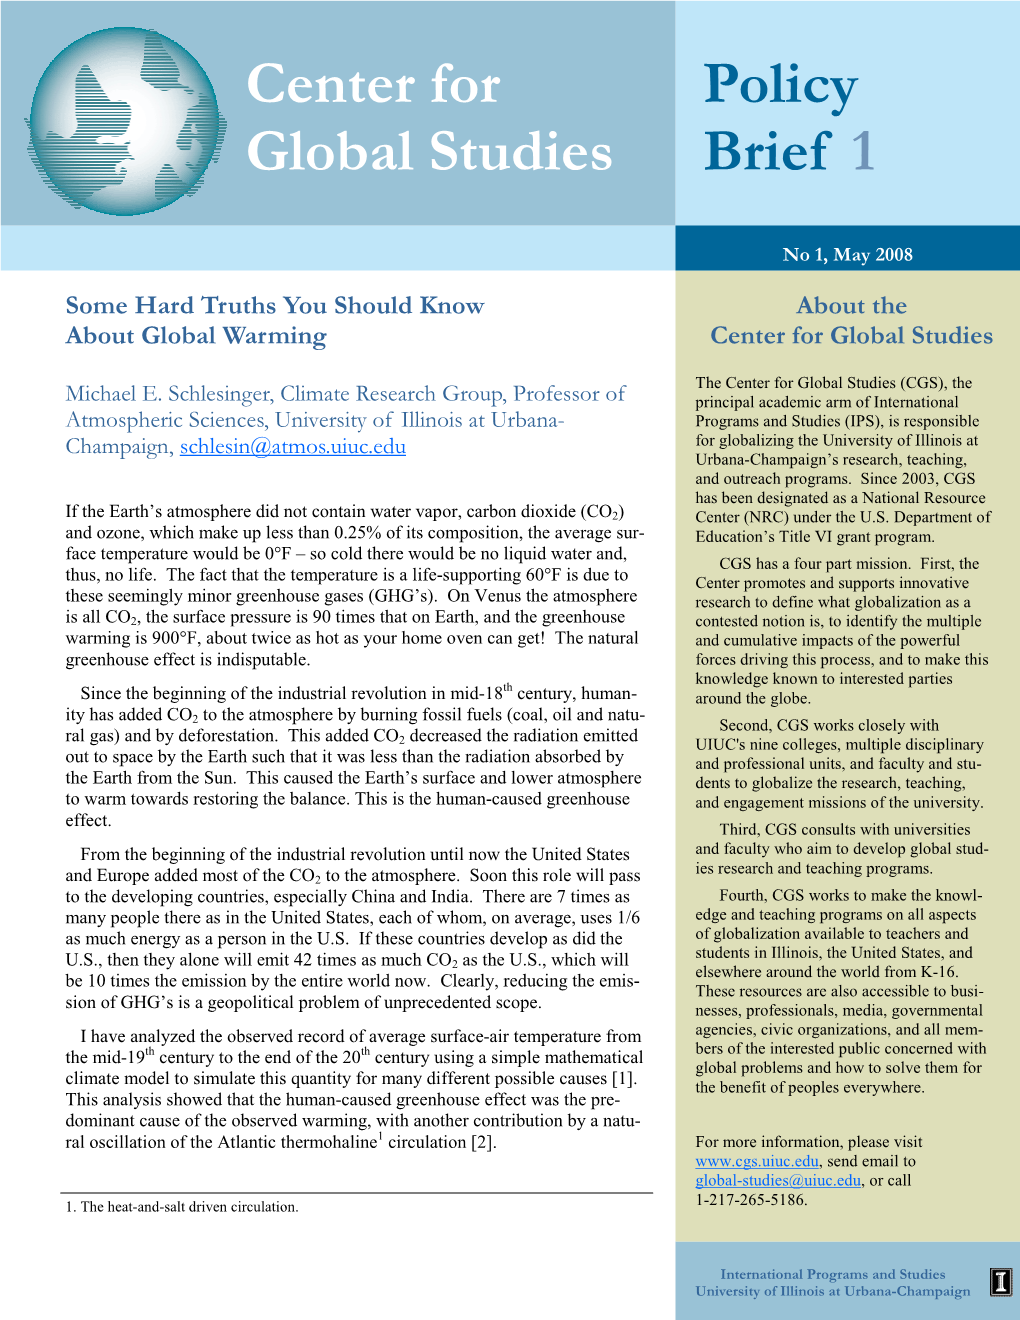 Center for Global Studies Policy Brief 1